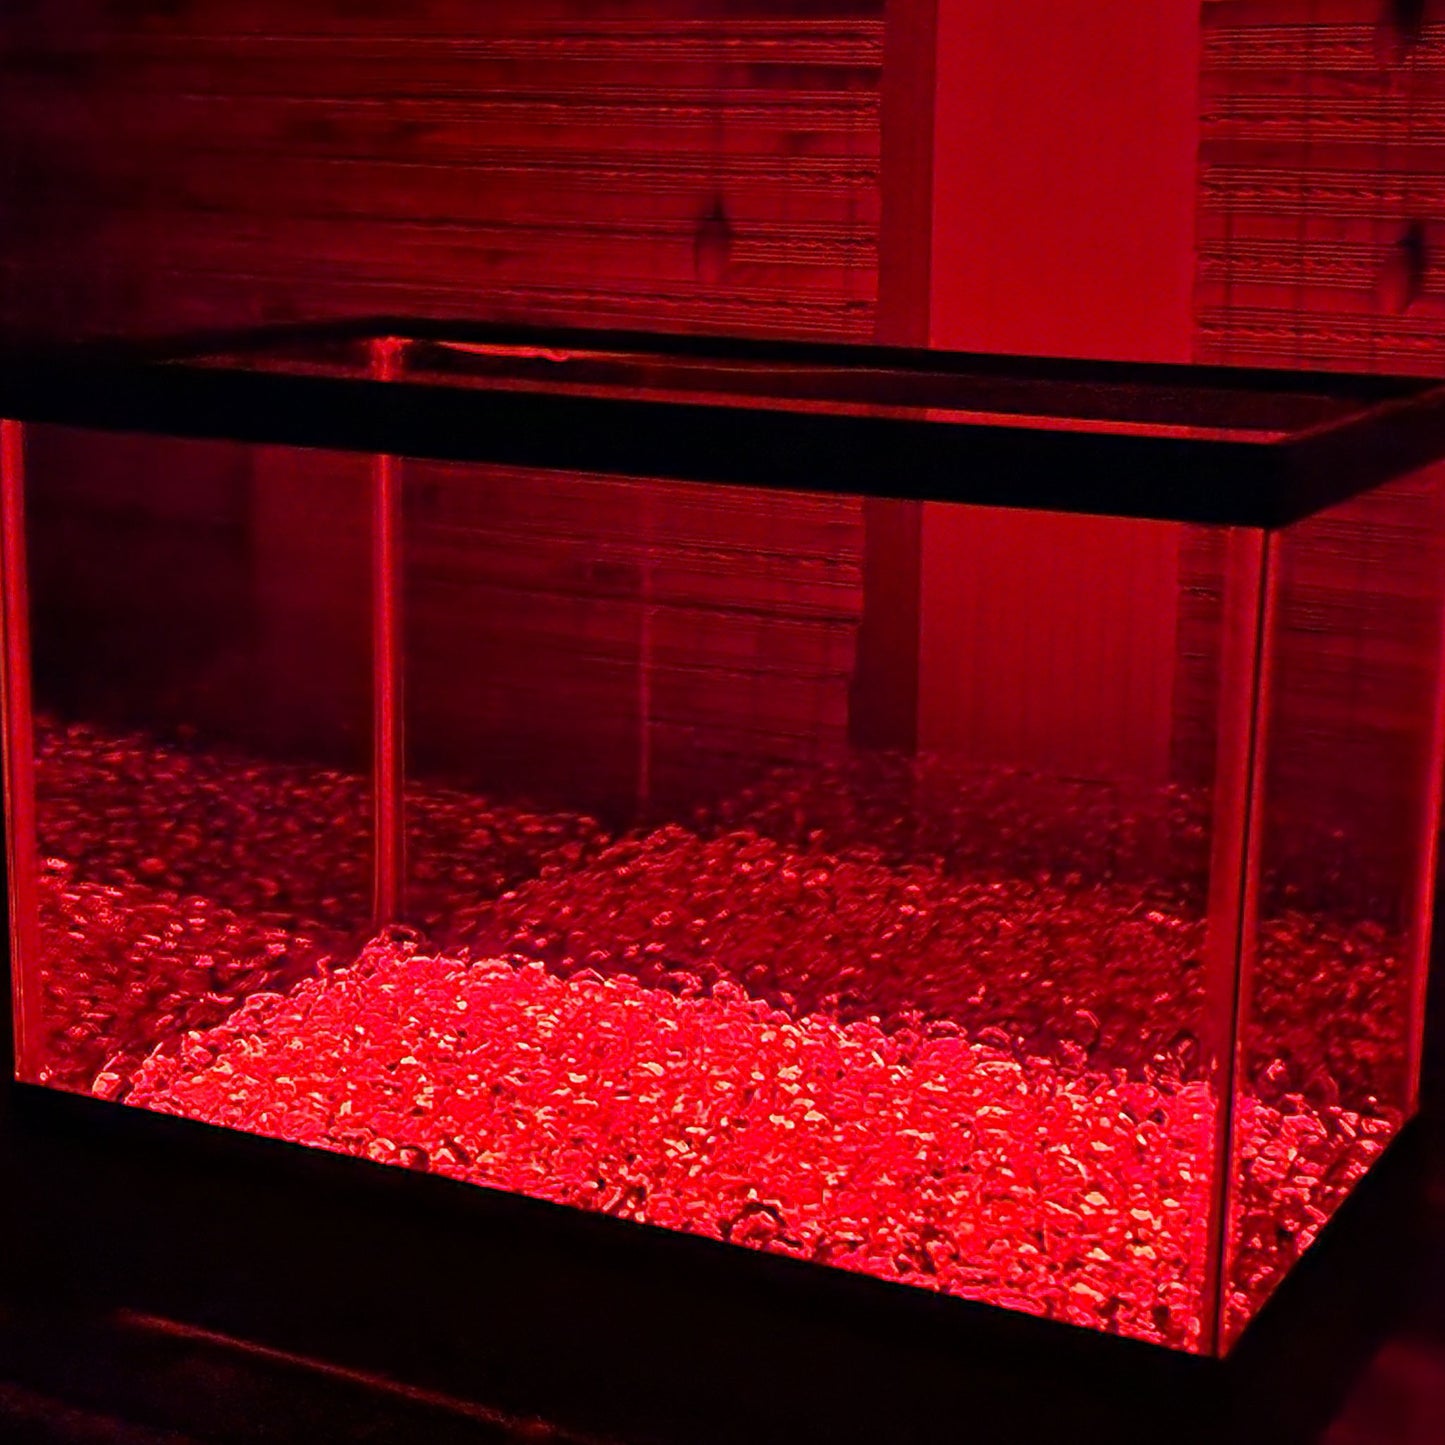 LED lights in red at night.